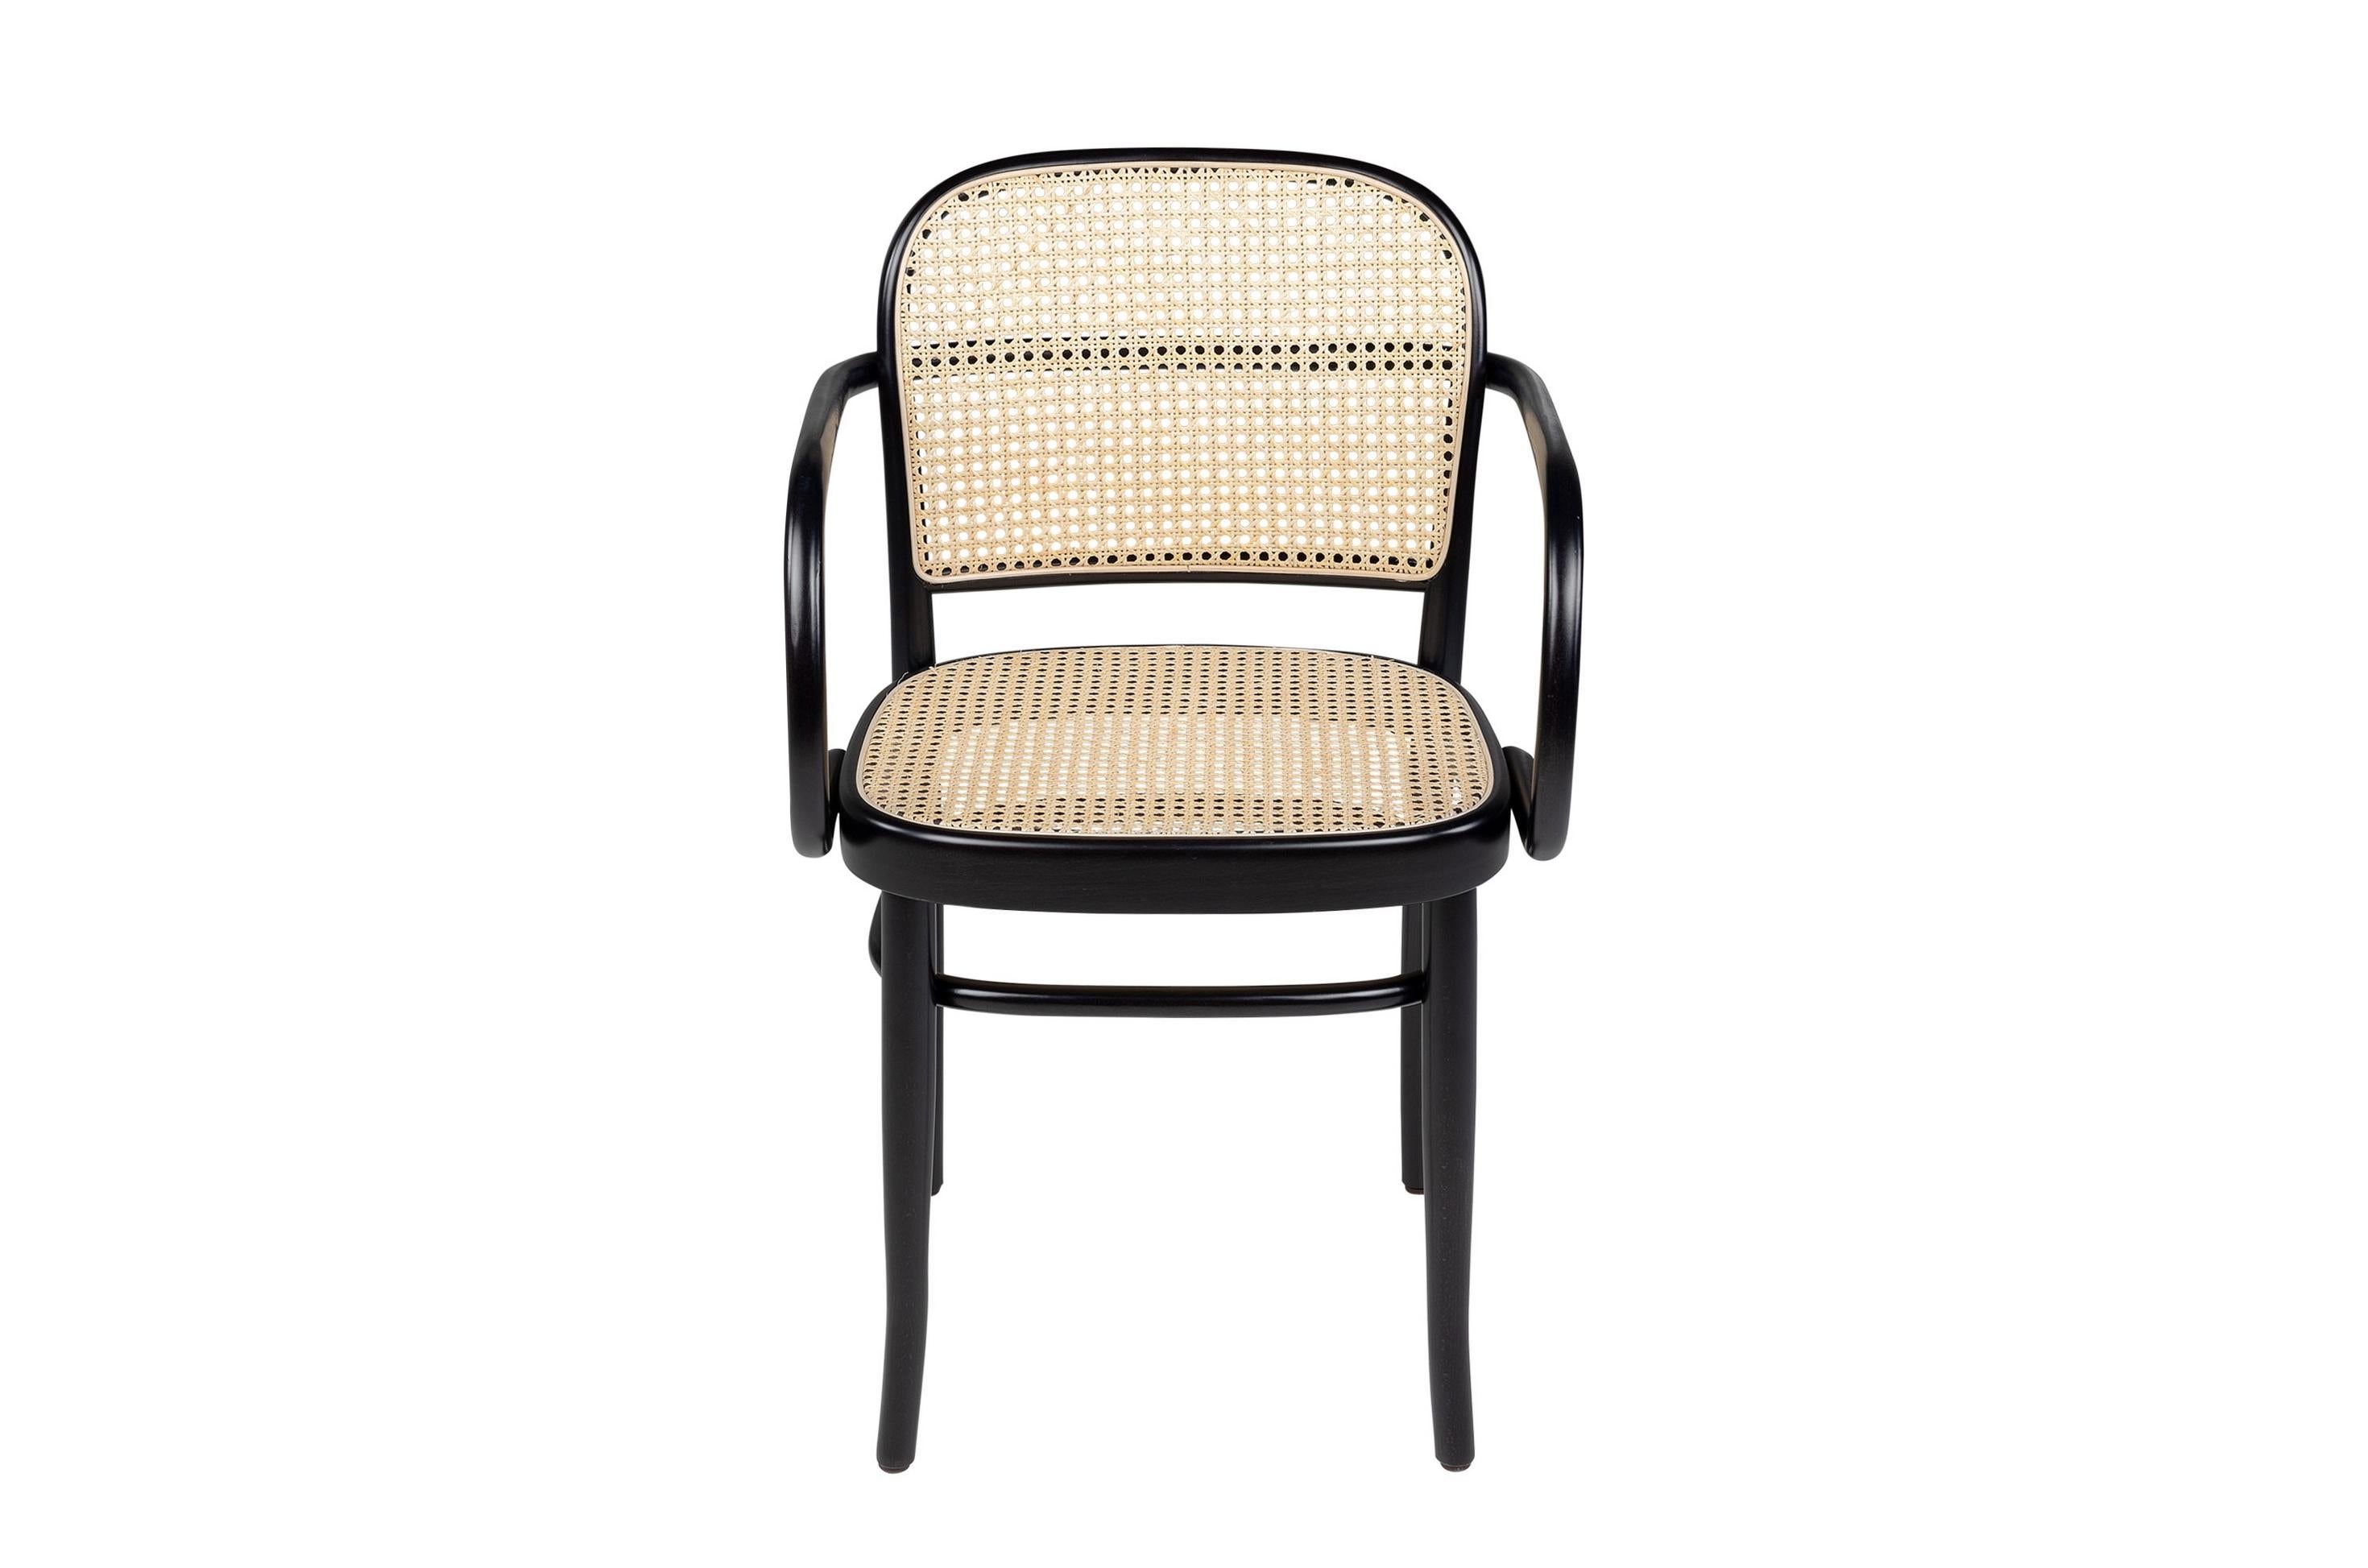 Black Lacquered Beech Wooden and Wicker Cane Armchair For Sale 1